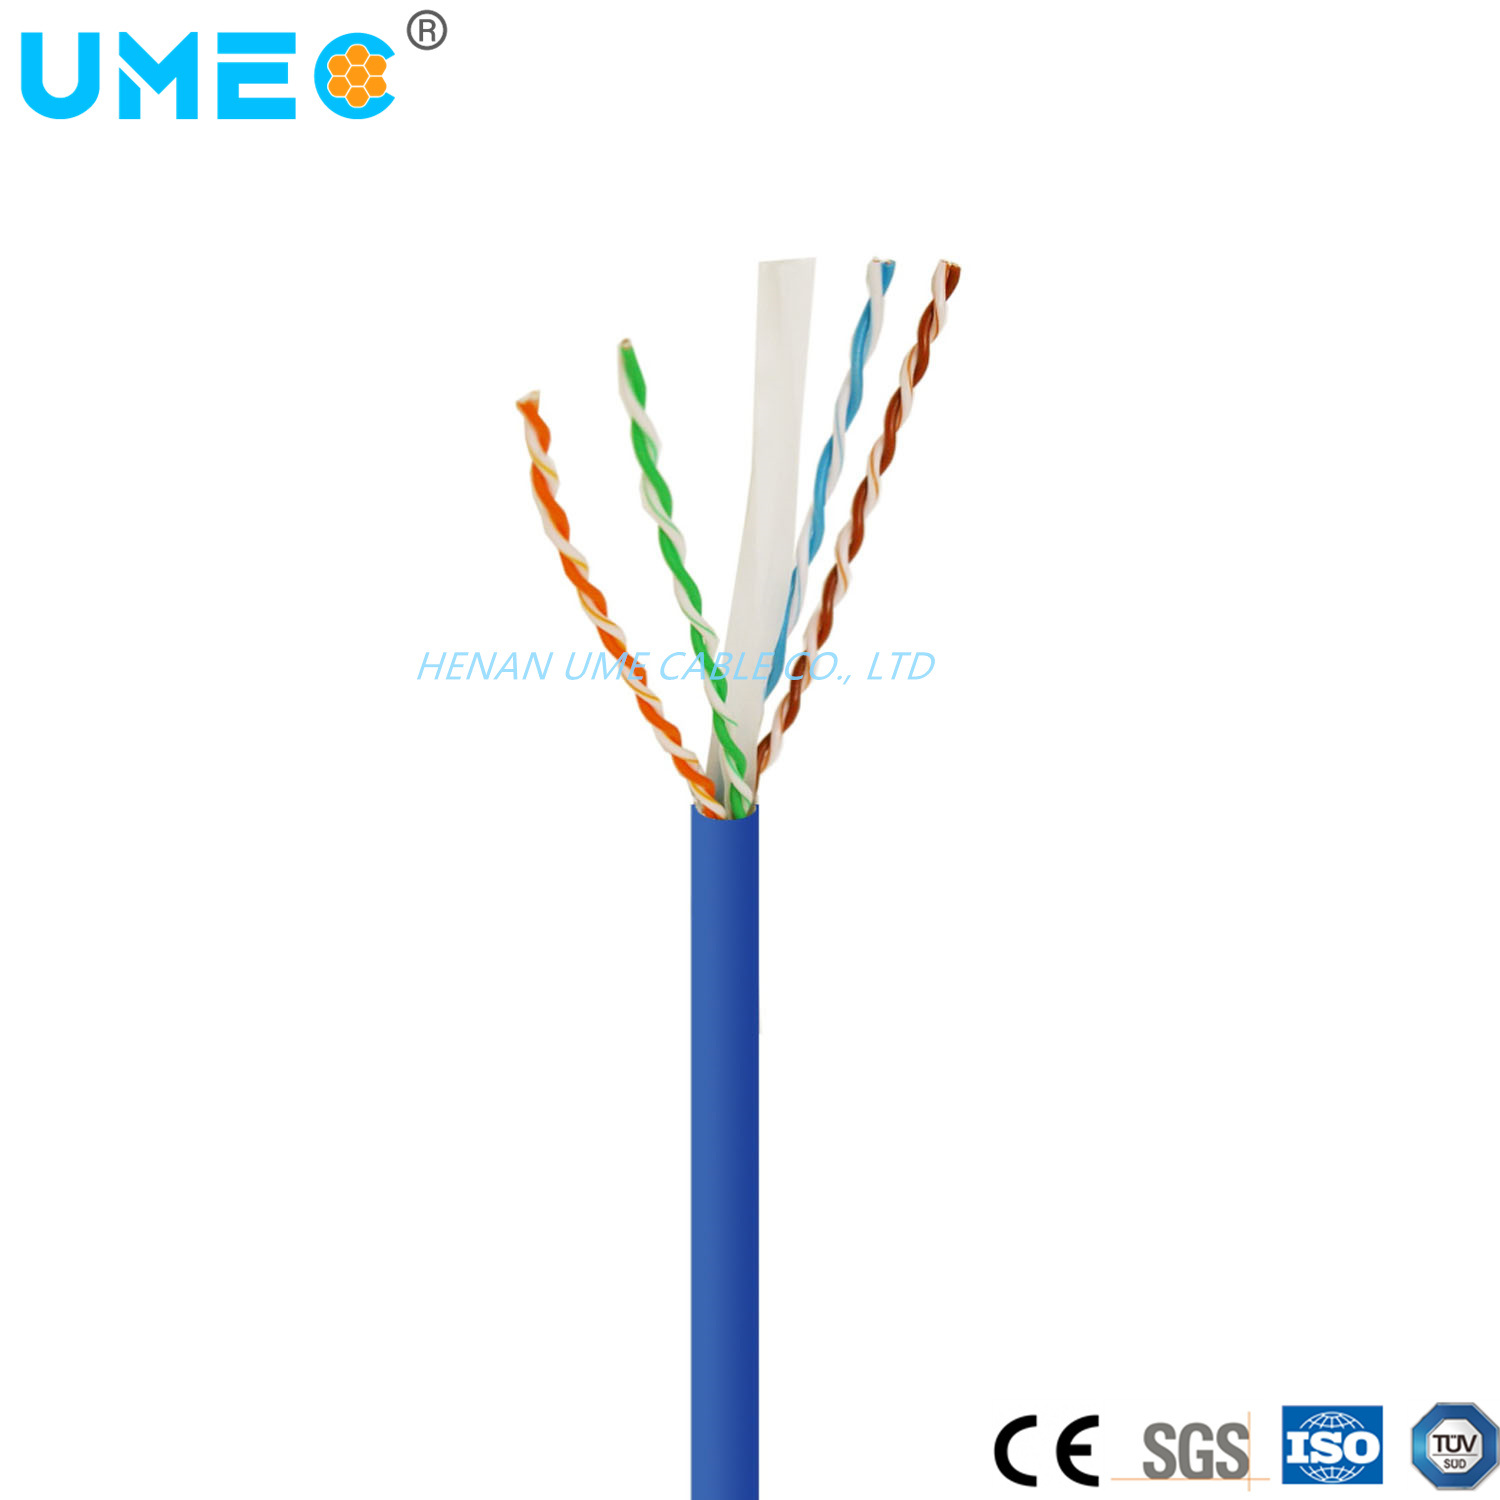 Good/High Quality Data LAN Ethernet Network Cable Network Cable CAT6 UTP Wall Socket Cable